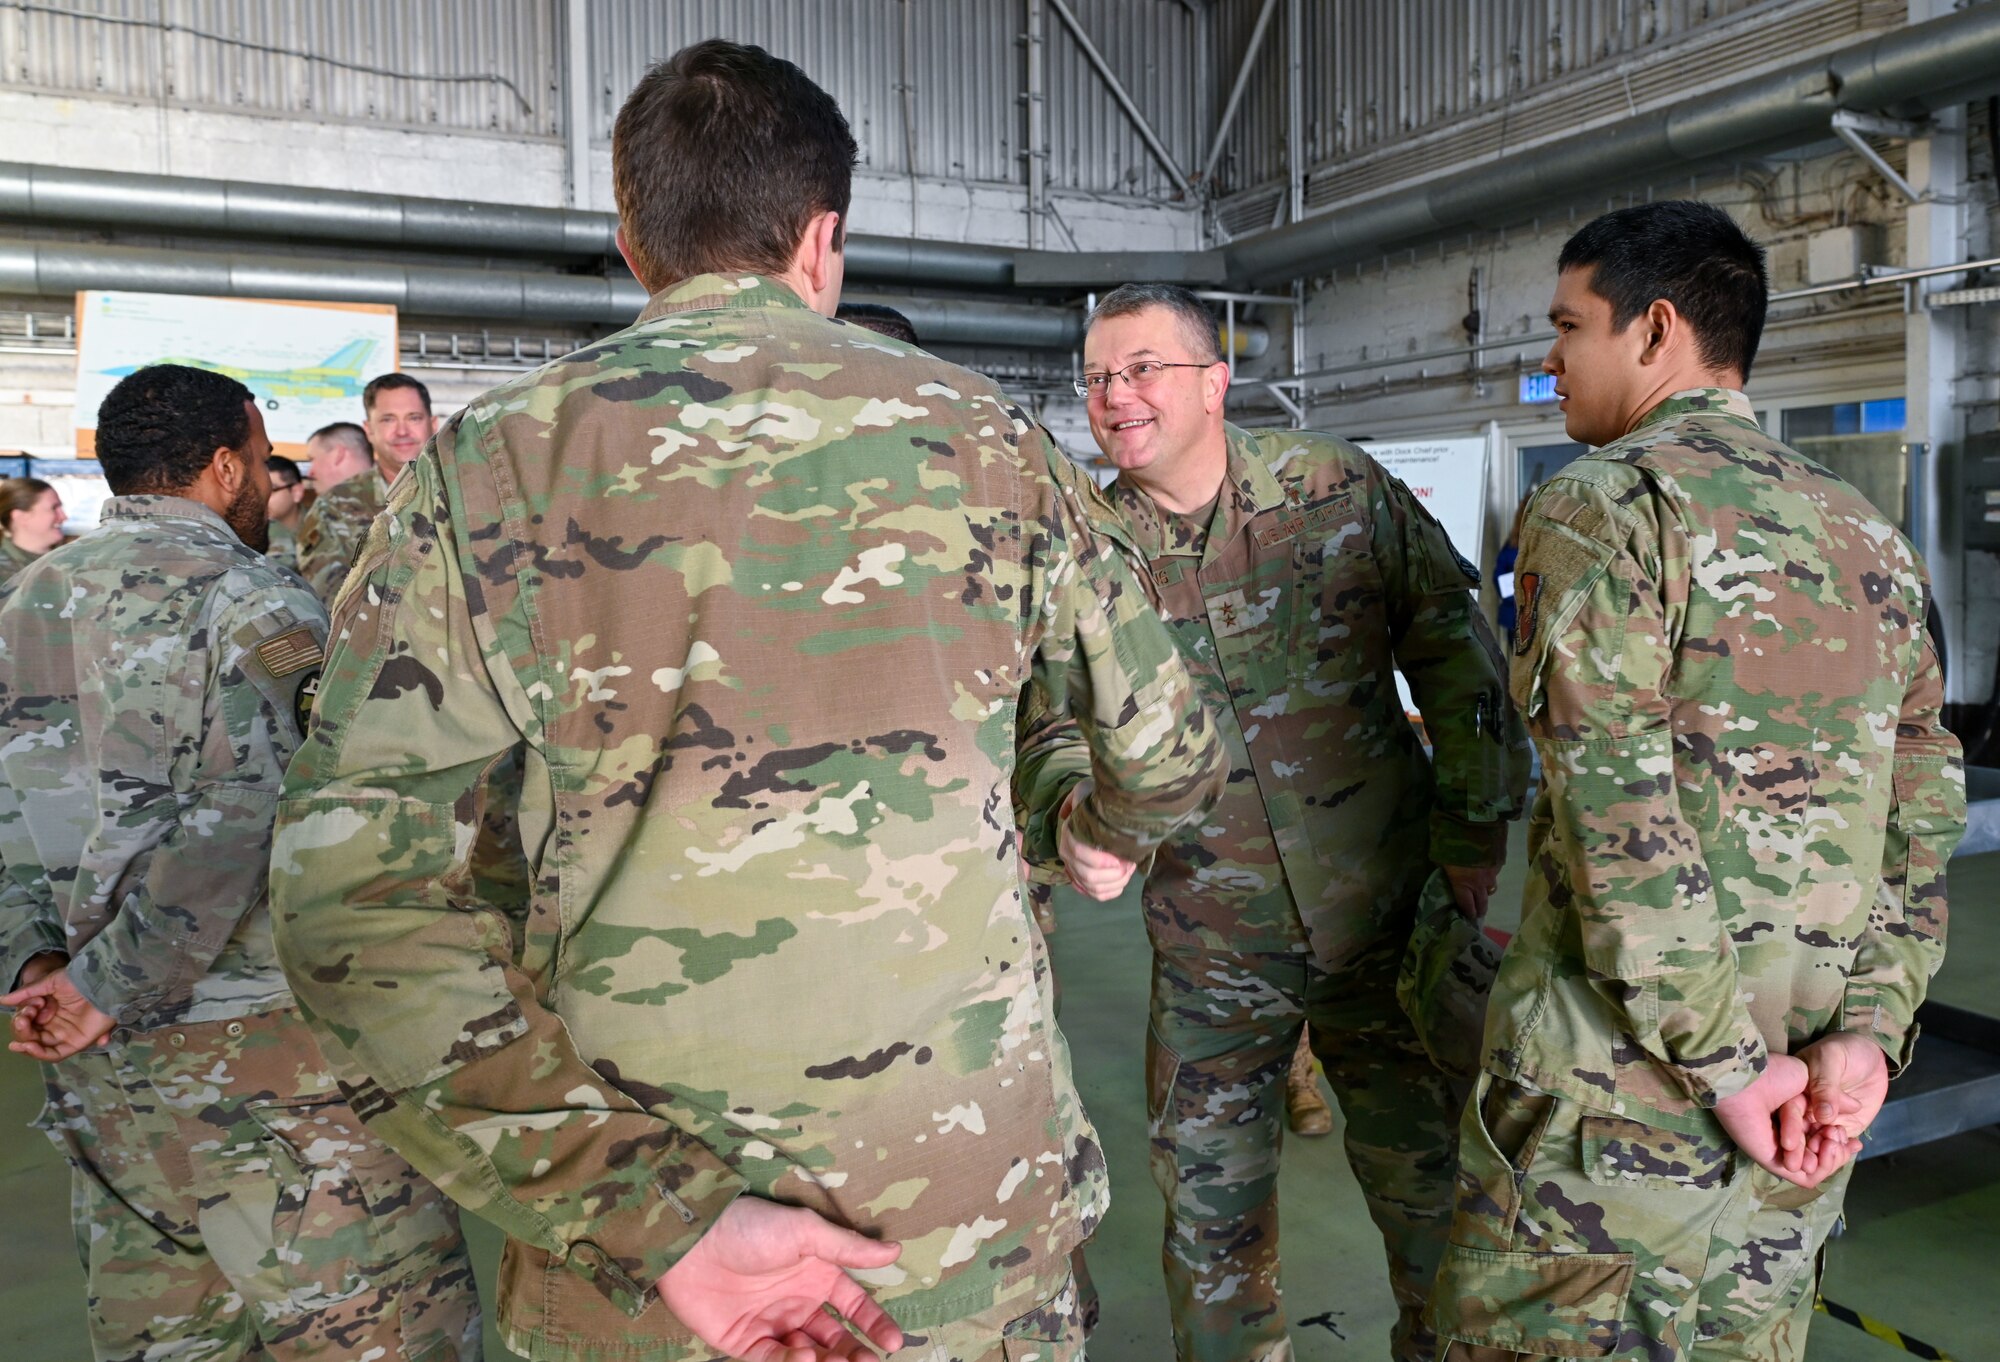 Chaplain (Maj. Gen.) Randall Kitchens, U.S. Air Force chief of chaplains, shakes hands with Airmen assigned to the 52nd Maintenance Group and 480th Fighter Squadron at Spangdahlem Air Base, Germany